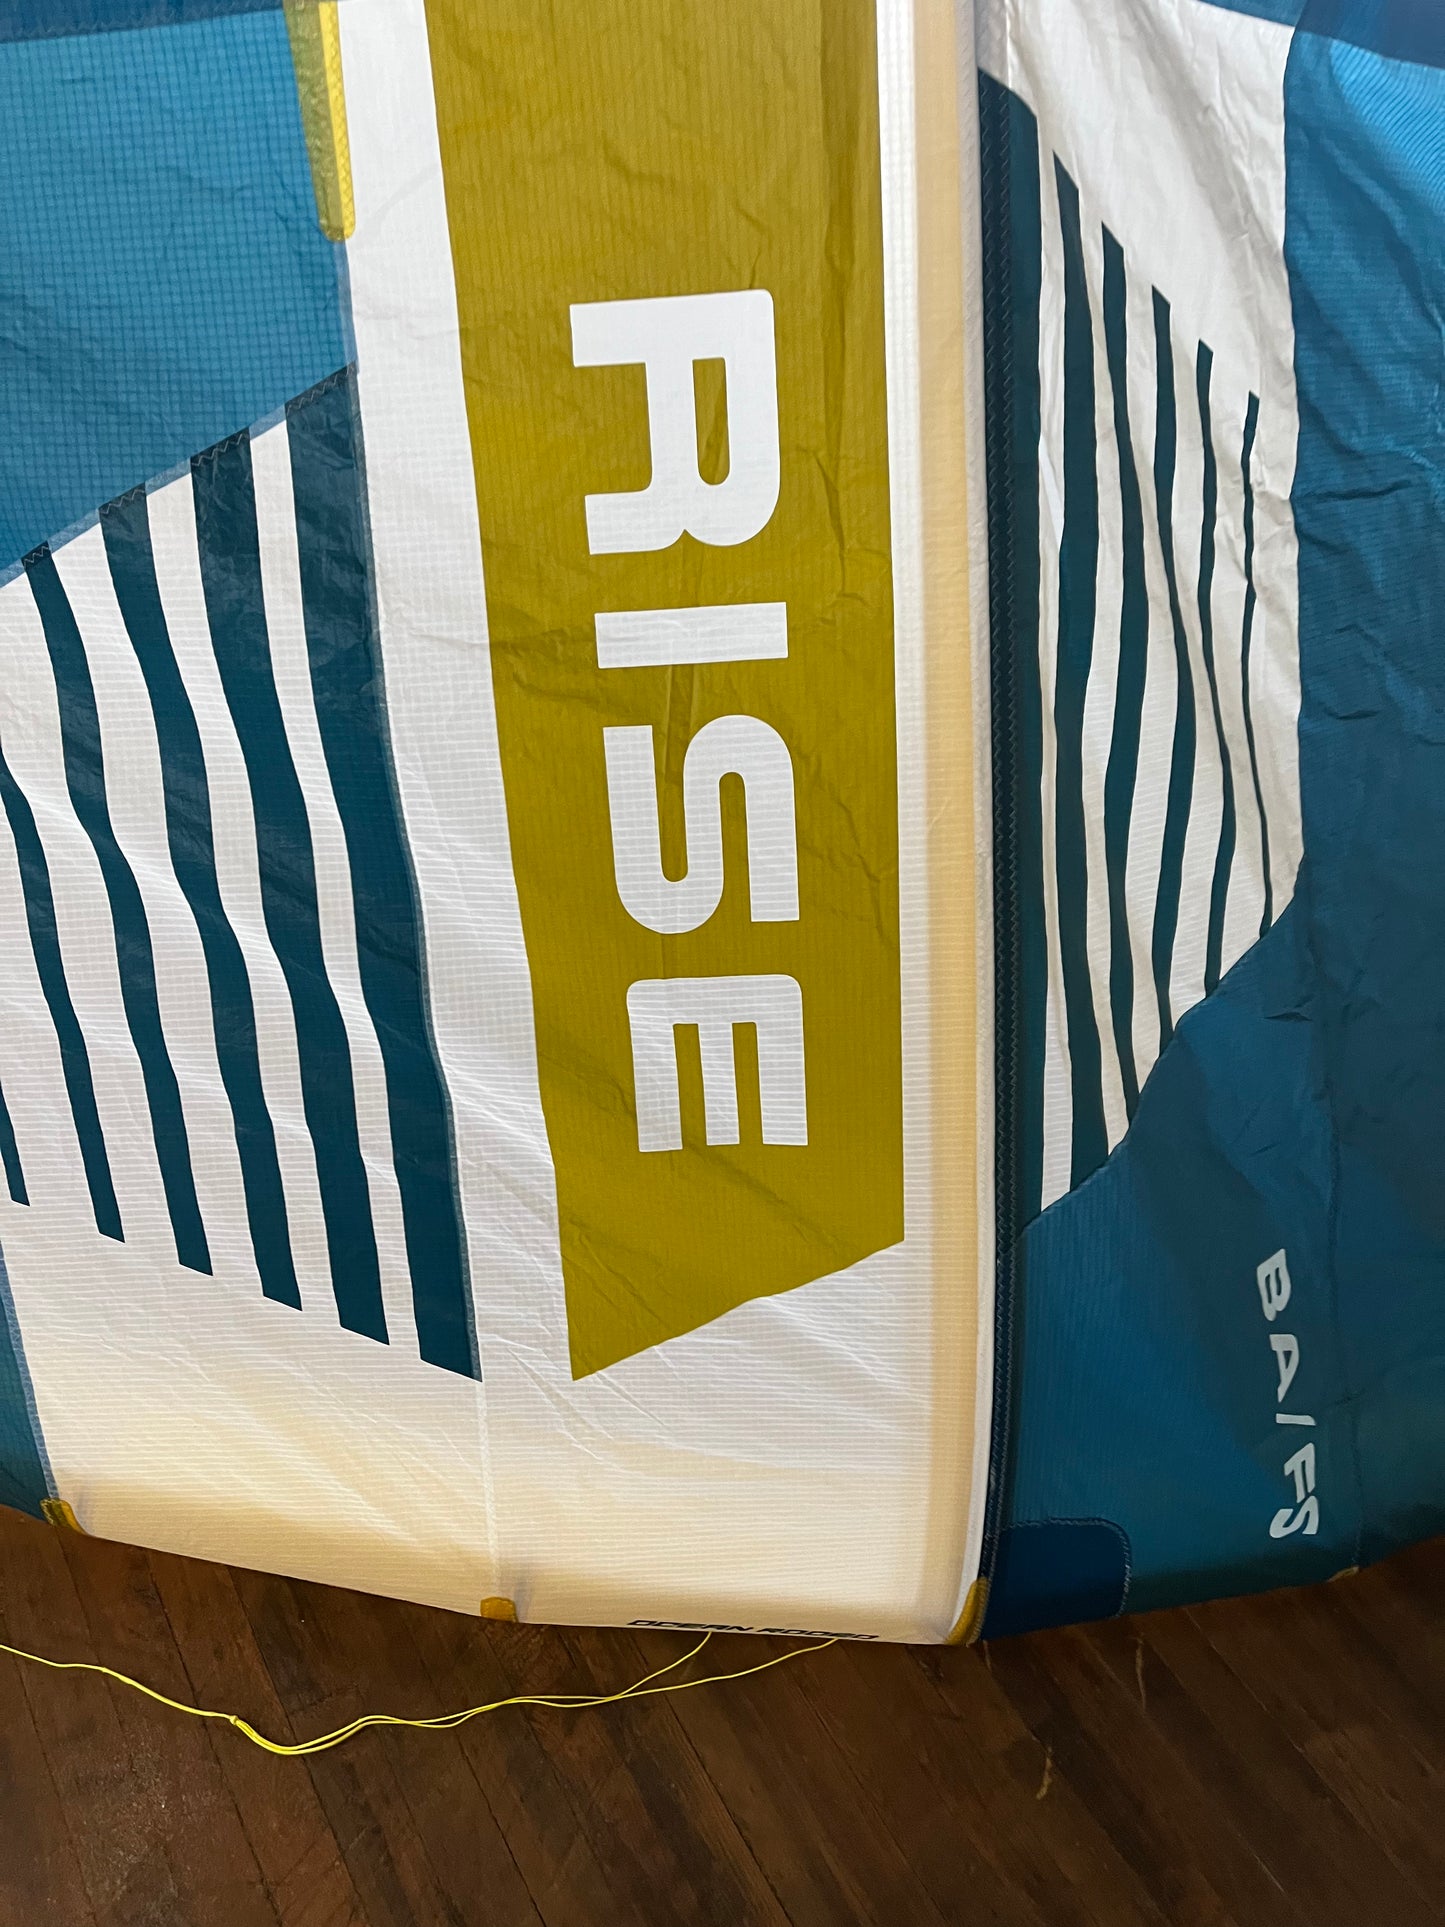 USED OCEAN RODEO RISE A SERIES KITE 9M